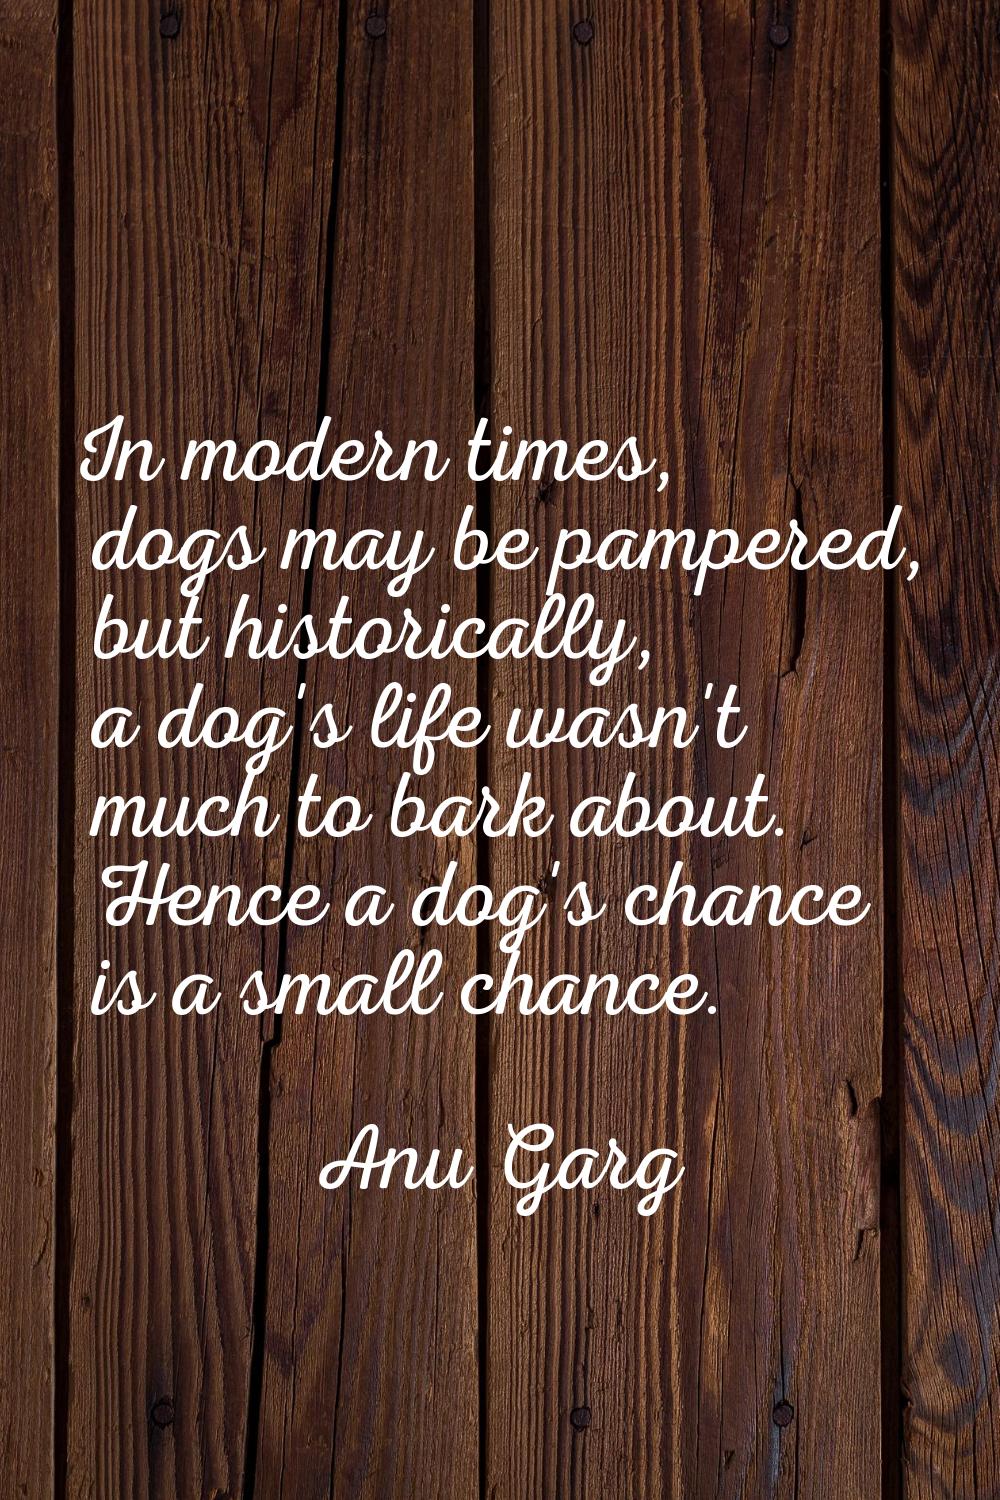 In modern times, dogs may be pampered, but historically, a dog's life wasn't much to bark about. He